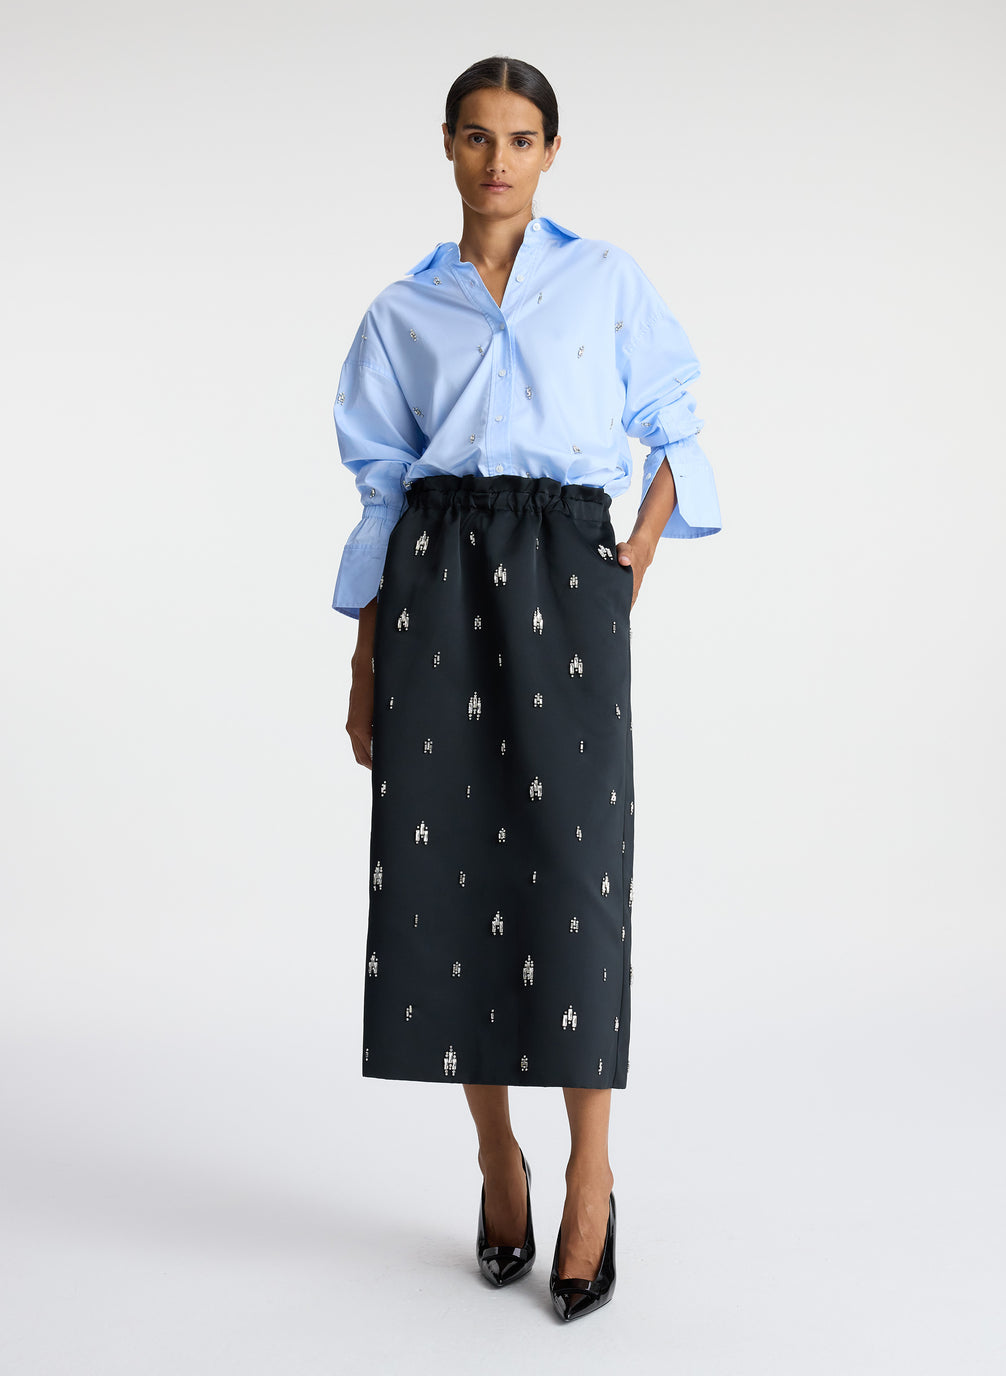 front view of woman wearing blue embellished button down top and black embellished midi skirt